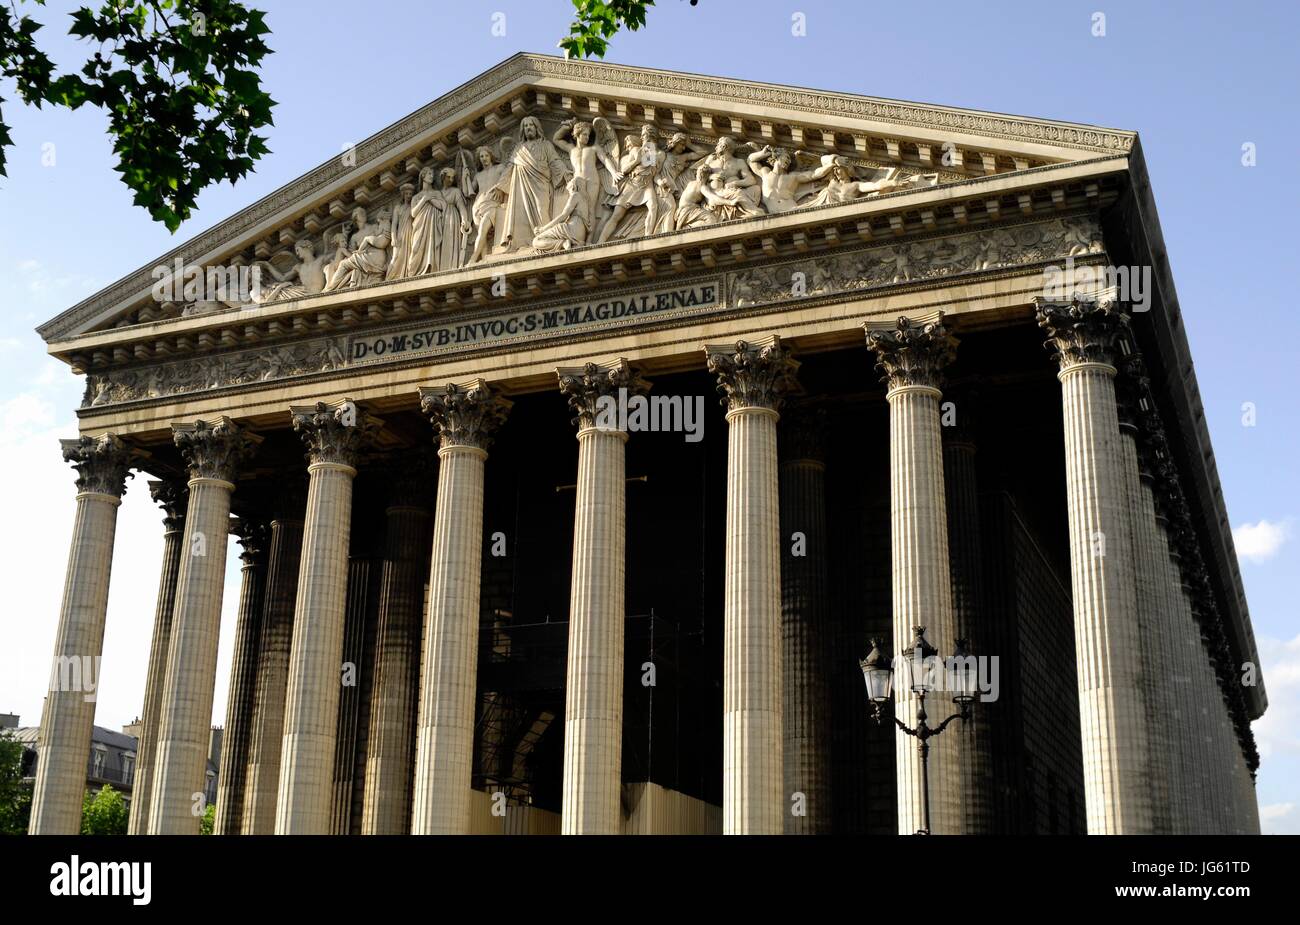 AJAXNETPHOTO. 2012. PARIS, FRANCE. - MAGDALENAE FREIZE AND COLUMNS - SCULPTURE ON THE FACADE OF THE  CHURCH OF LA MADALEINE. PHOTO:JONATHAN EASTLAND/AJAX REF:D121506 2682 Stock Photo